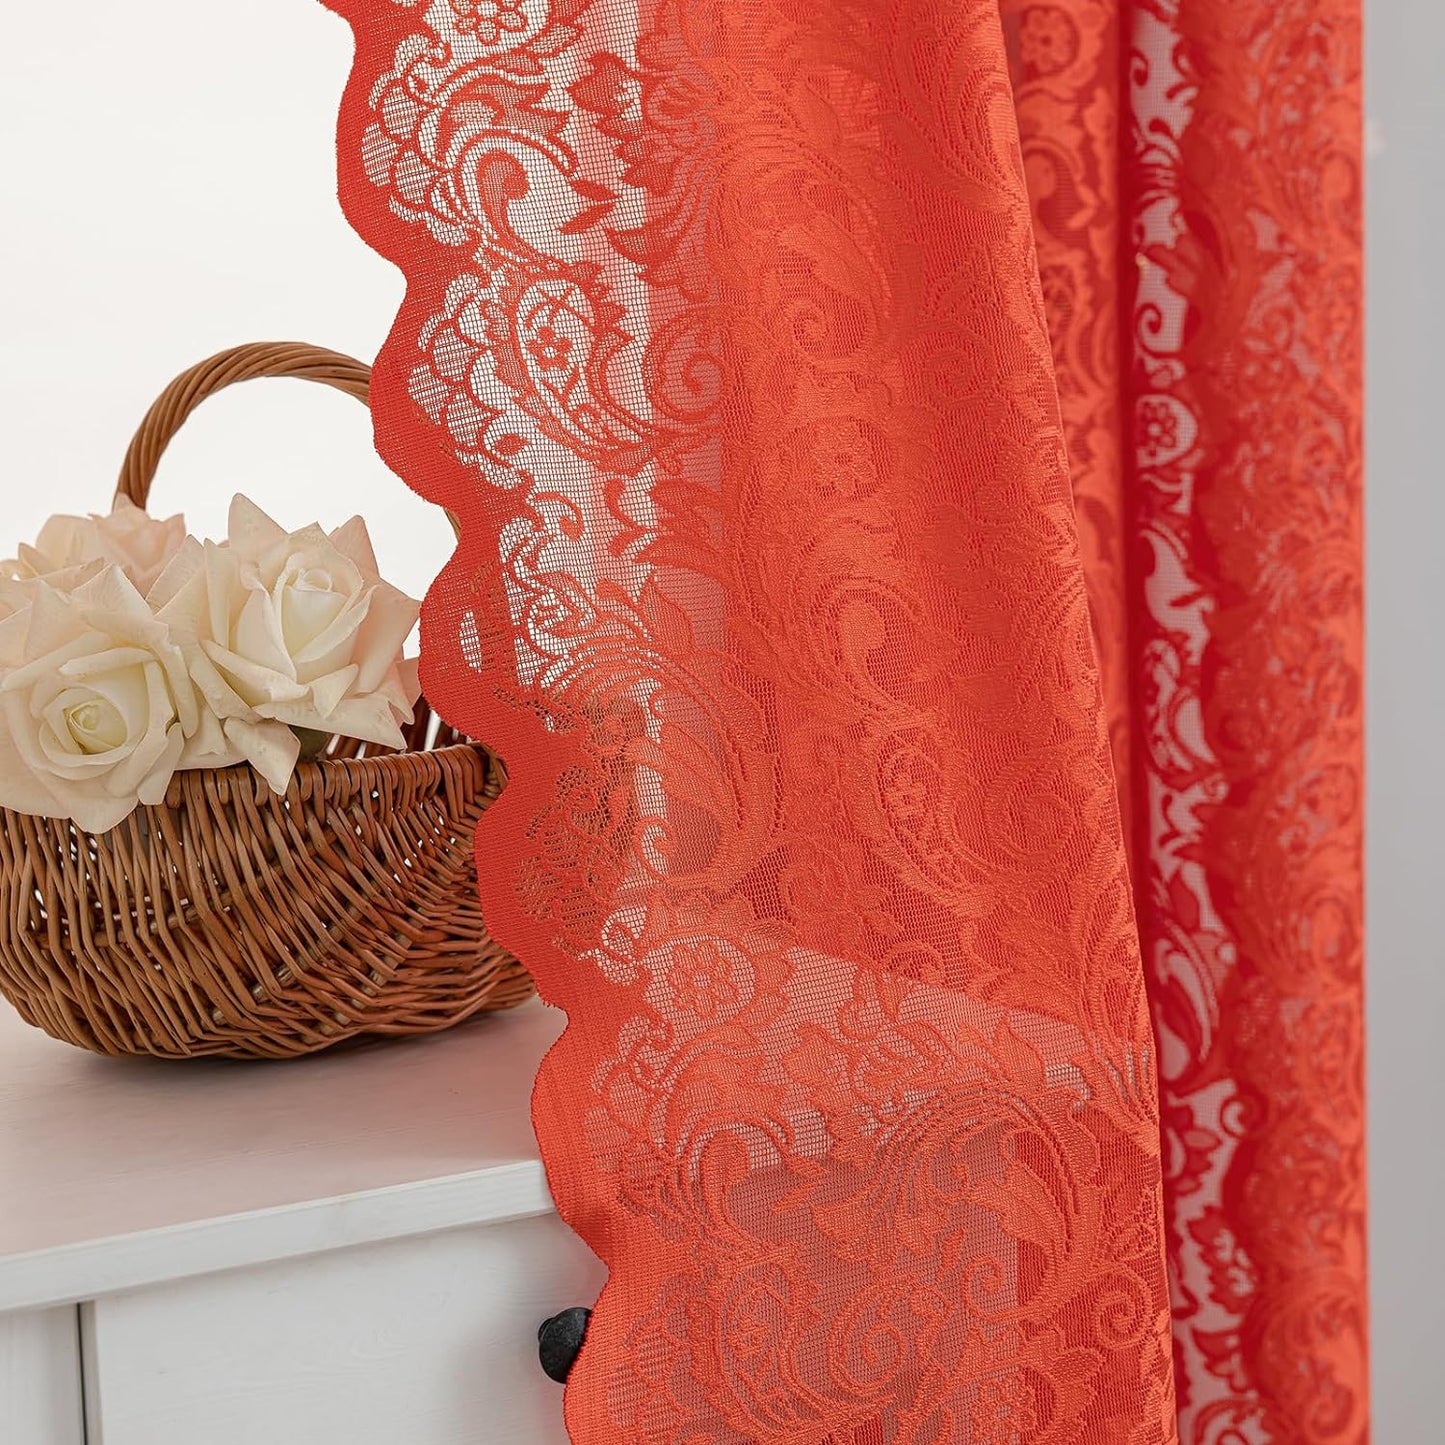 ALIGOGO White Lace Curtains 84 Inches Long-Vintage Floral Luxury Lace Sheer Curtains for Living Room 2 Panels Rod Pocket 52 W X 84 L Inch,White  ALIGOGO Orange 52" W X 63" L 